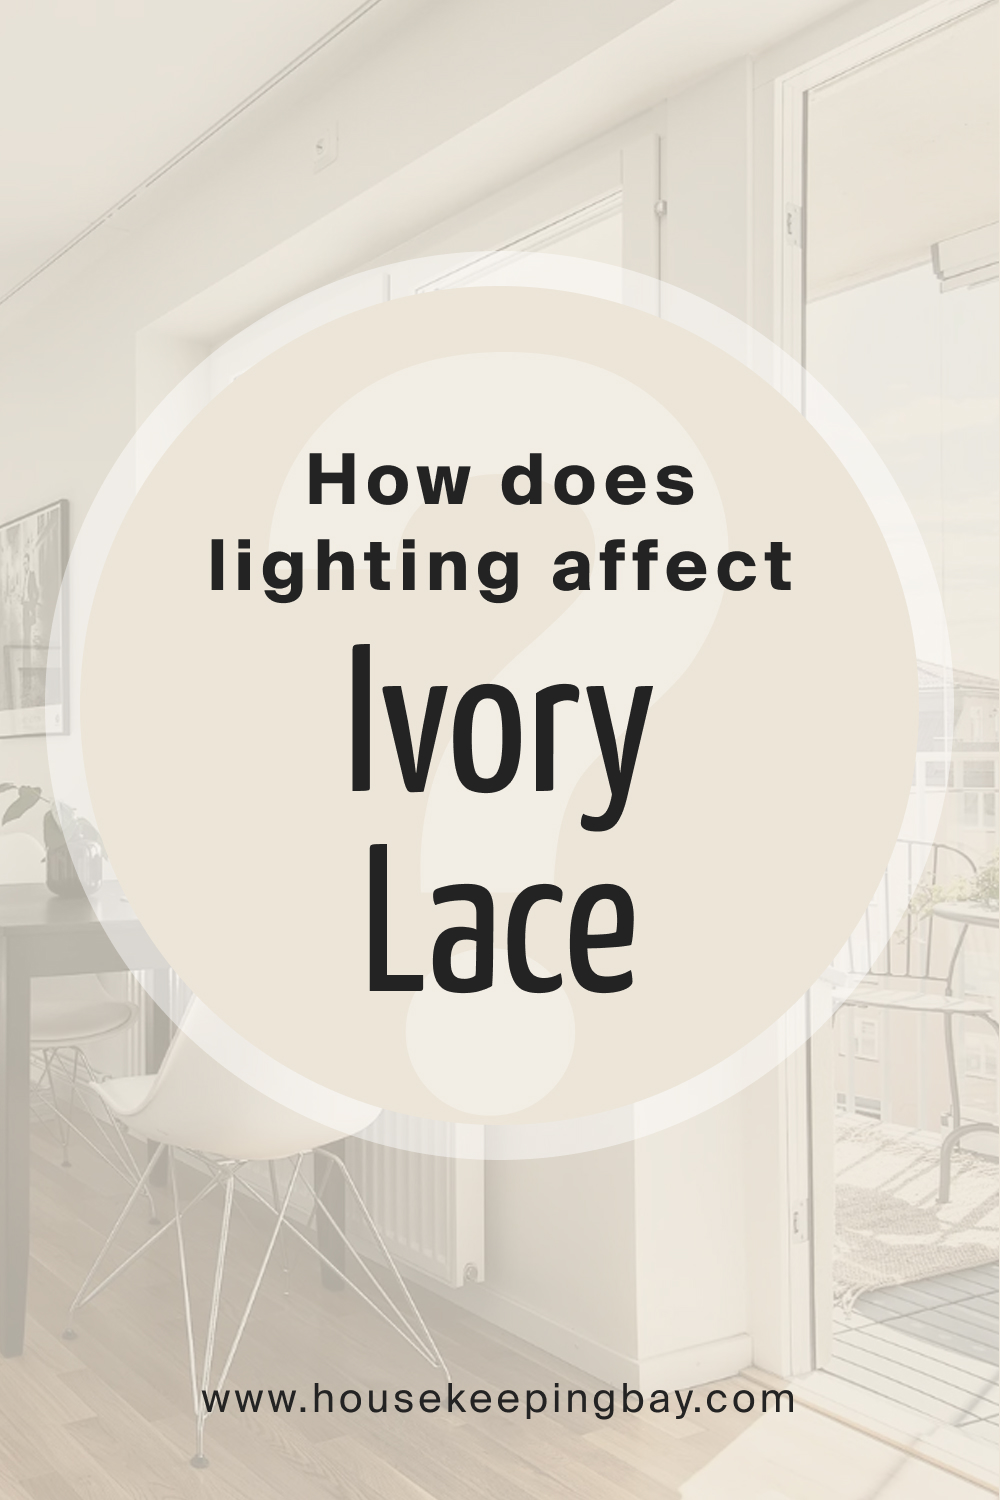 How does lighting affect SW Ivory